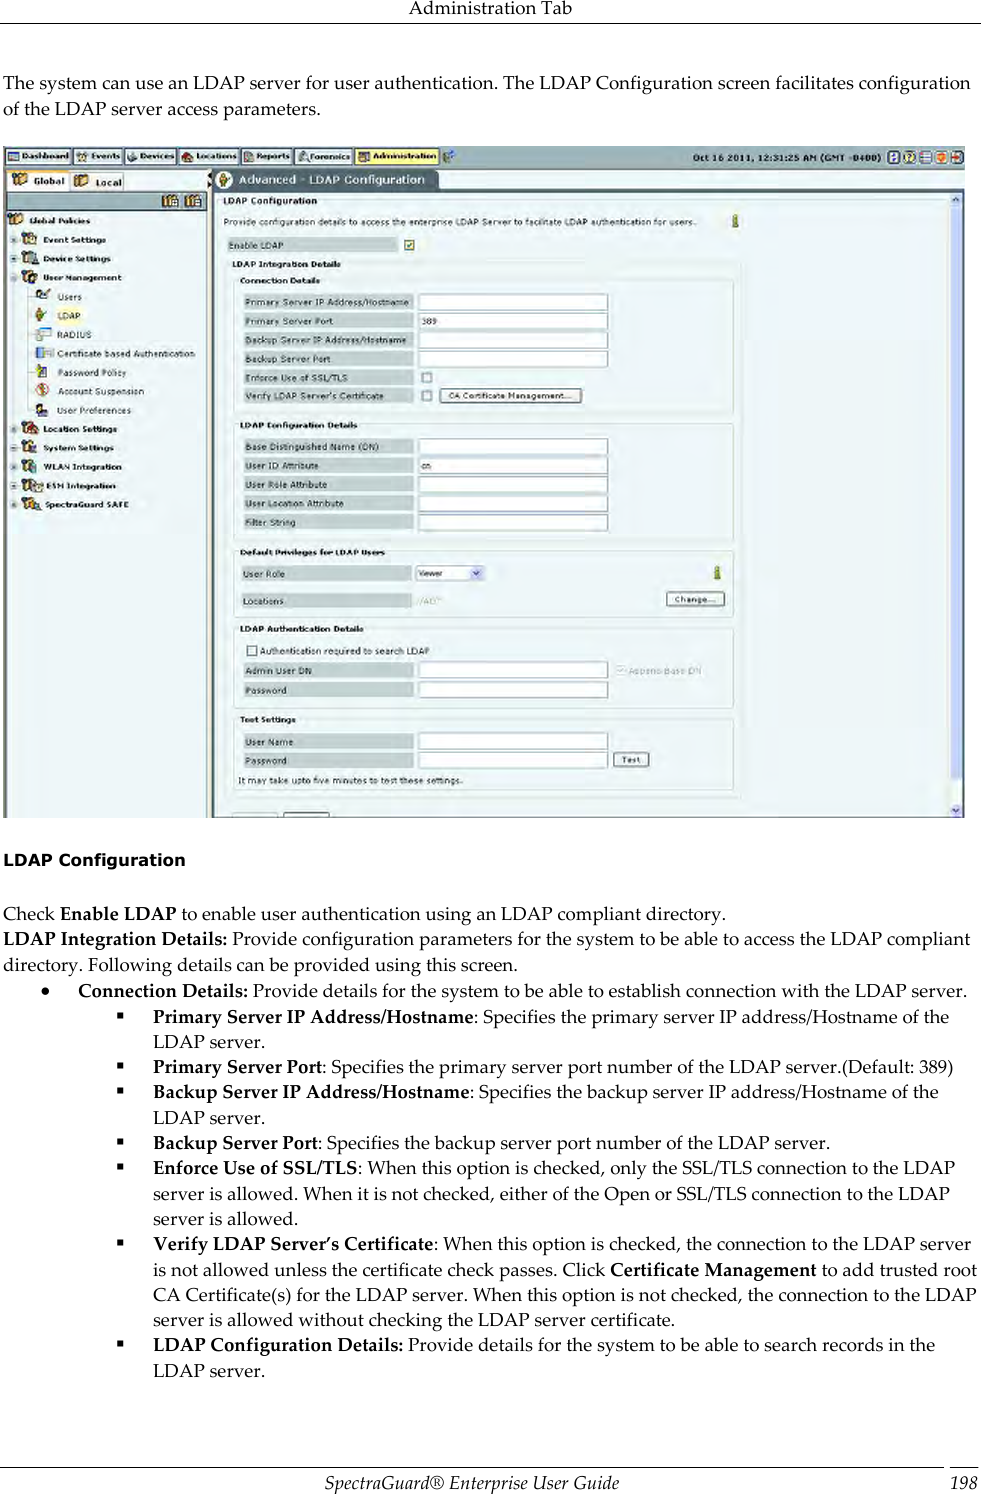 Administration Tab SpectraGuard®  Enterprise User Guide 198 The system can use an LDAP server for user authentication. The LDAP Configuration screen facilitates configuration of the LDAP server access parameters.      LDAP Configuration   Check Enable LDAP to enable user authentication using an LDAP compliant directory. LDAP Integration Details: Provide configuration parameters for the system to be able to access the LDAP compliant directory. Following details can be provided using this screen.  Connection Details: Provide details for the system to be able to establish connection with the LDAP server.  Primary Server IP Address/Hostname: Specifies the primary server IP address/Hostname of the LDAP server.  Primary Server Port: Specifies the primary server port number of the LDAP server.(Default: 389)  Backup Server IP Address/Hostname: Specifies the backup server IP address/Hostname of the LDAP server.  Backup Server Port: Specifies the backup server port number of the LDAP server.  Enforce Use of SSL/TLS: When this option is checked, only the SSL/TLS connection to the LDAP server is allowed. When it is not checked, either of the Open or SSL/TLS connection to the LDAP server is allowed.  Verify LDAP Server’s Certificate: When this option is checked, the connection to the LDAP server is not allowed unless the certificate check passes. Click Certificate Management to add trusted root CA Certificate(s) for the LDAP server. When this option is not checked, the connection to the LDAP server is allowed without checking the LDAP server certificate.  LDAP Configuration Details: Provide details for the system to be able to search records in the LDAP server. 